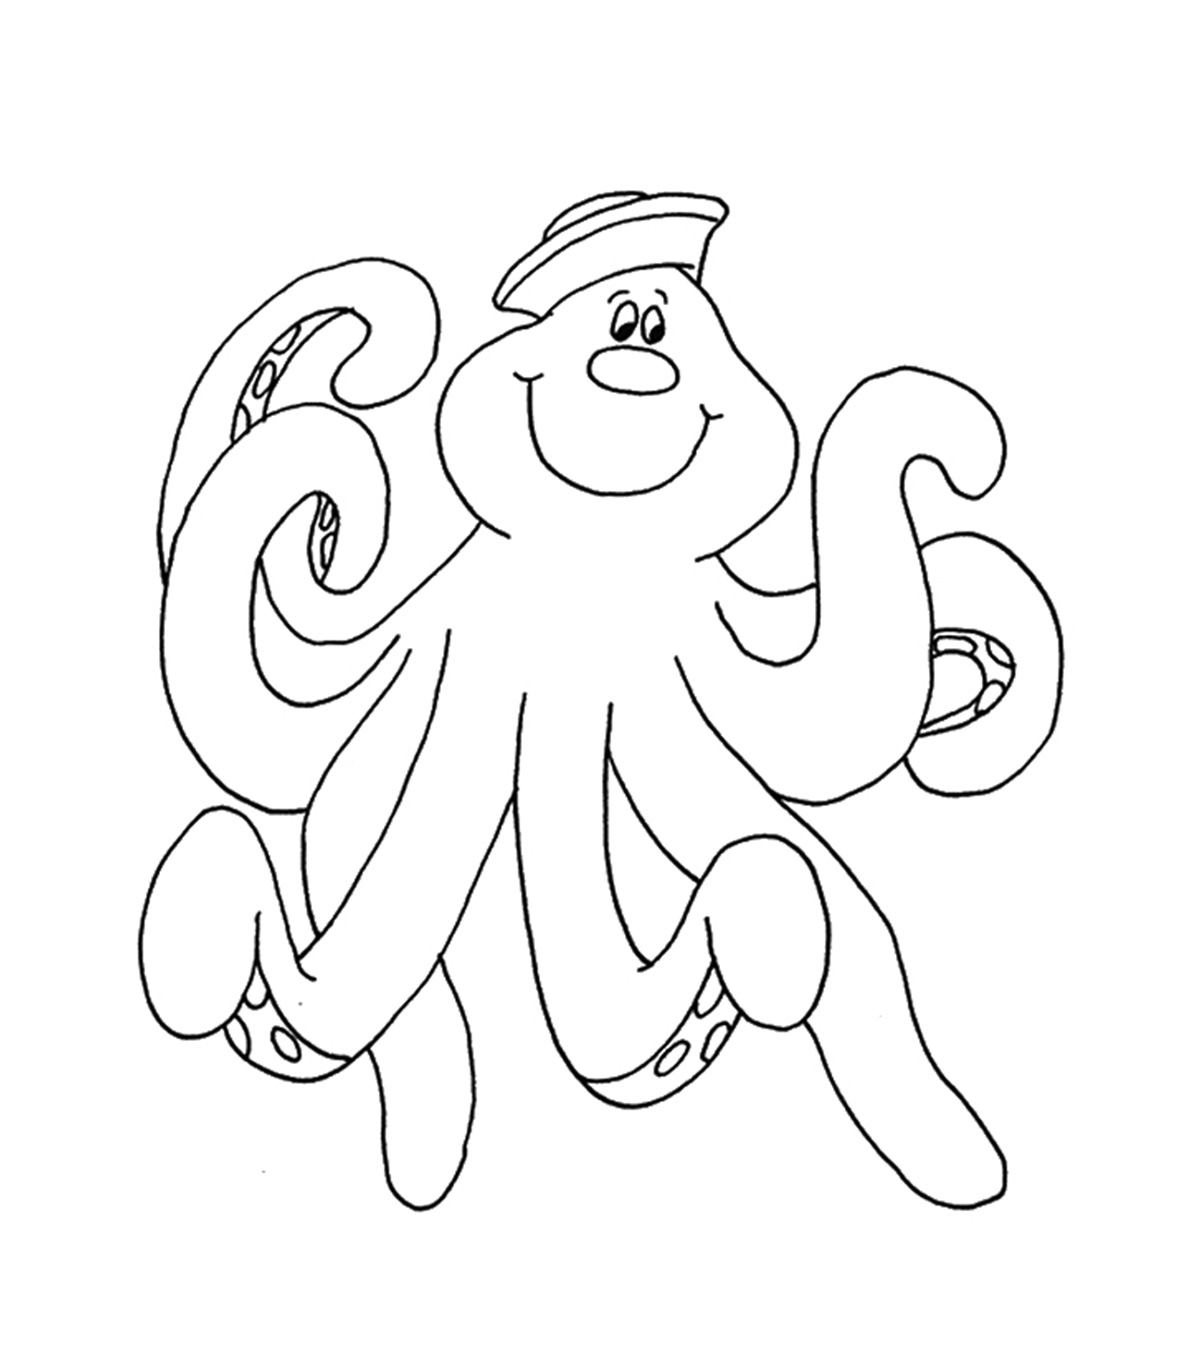 10 Cute Octopus Coloring Pages Your Toddler Will Love to Color_image